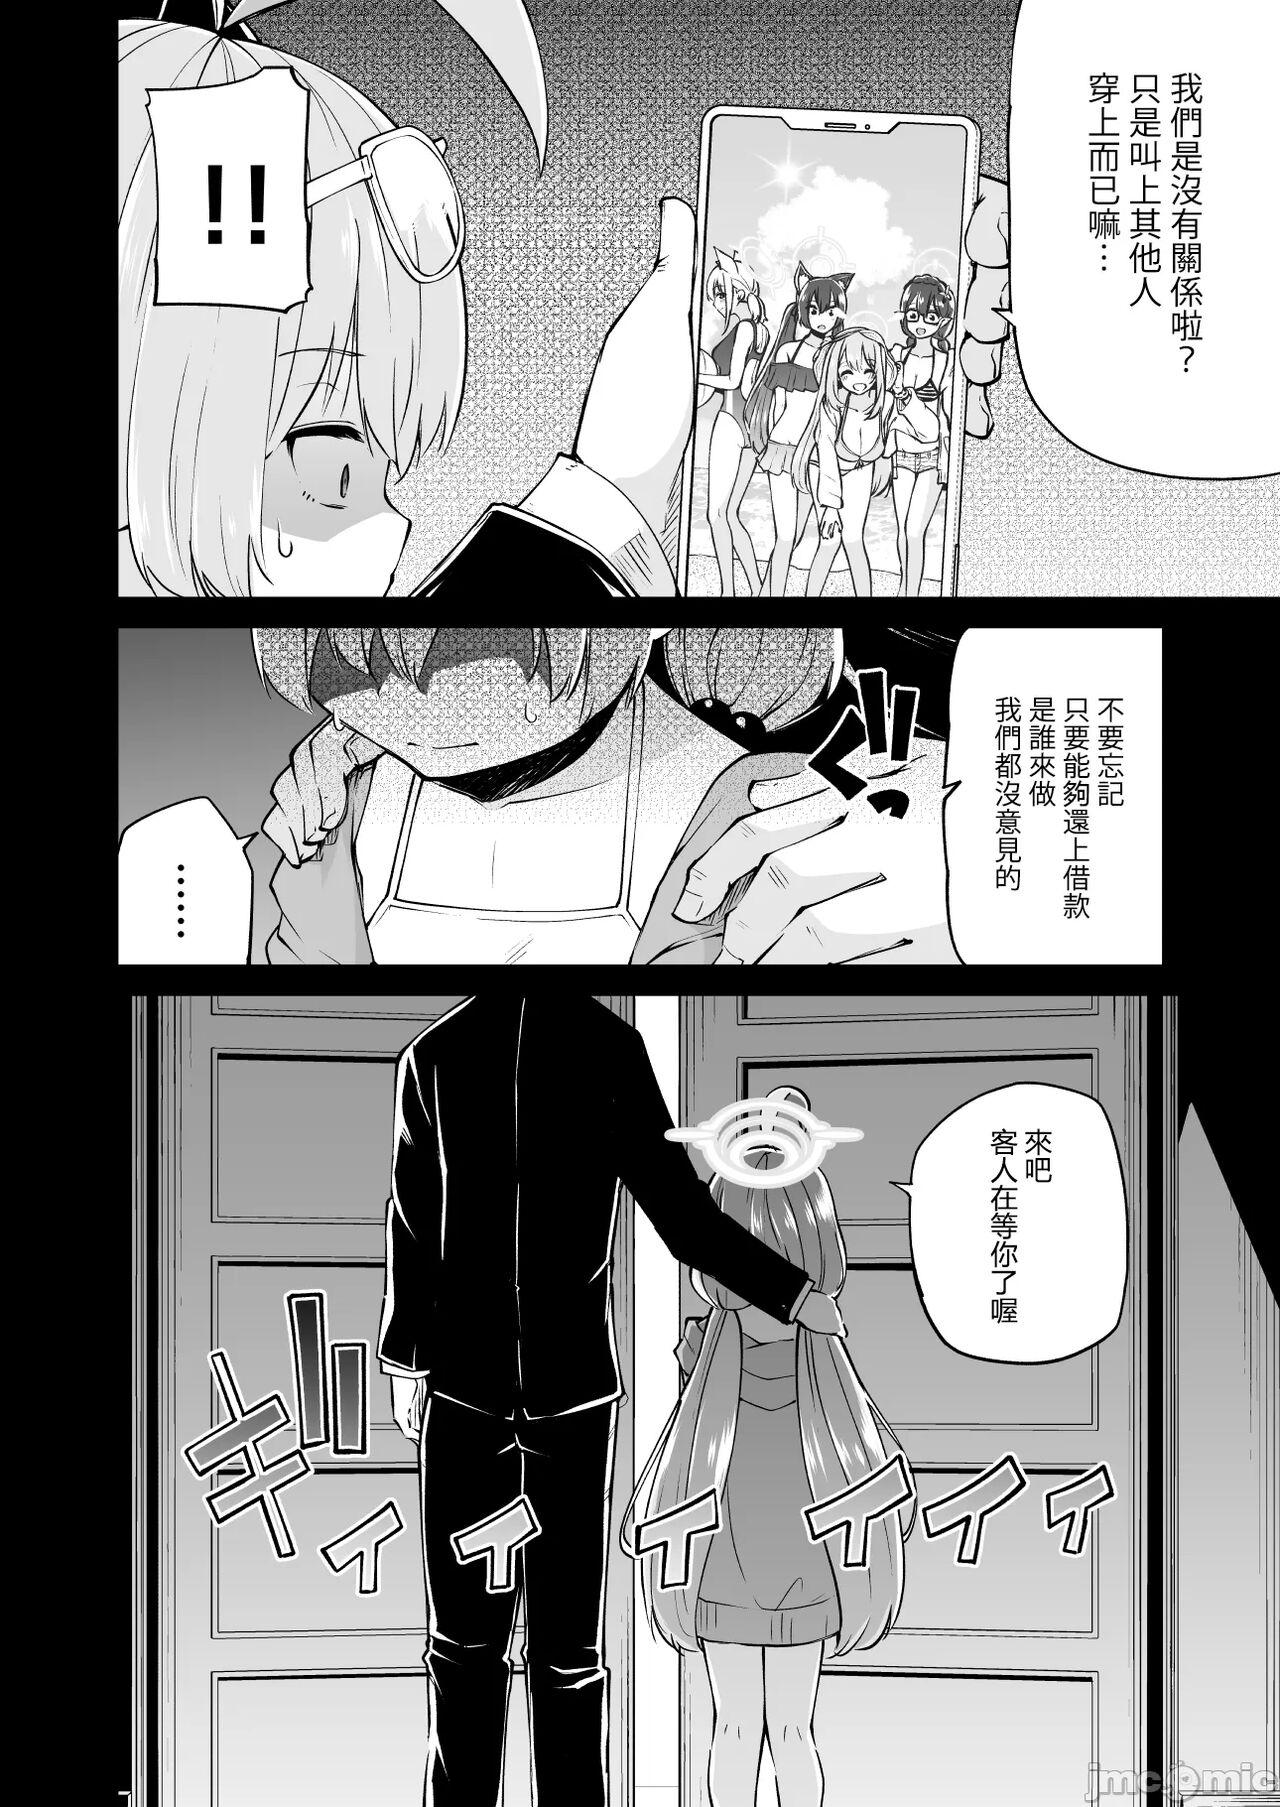 Chudai アビドス借金対策委員会 - Blue archive Toilet - Page 6